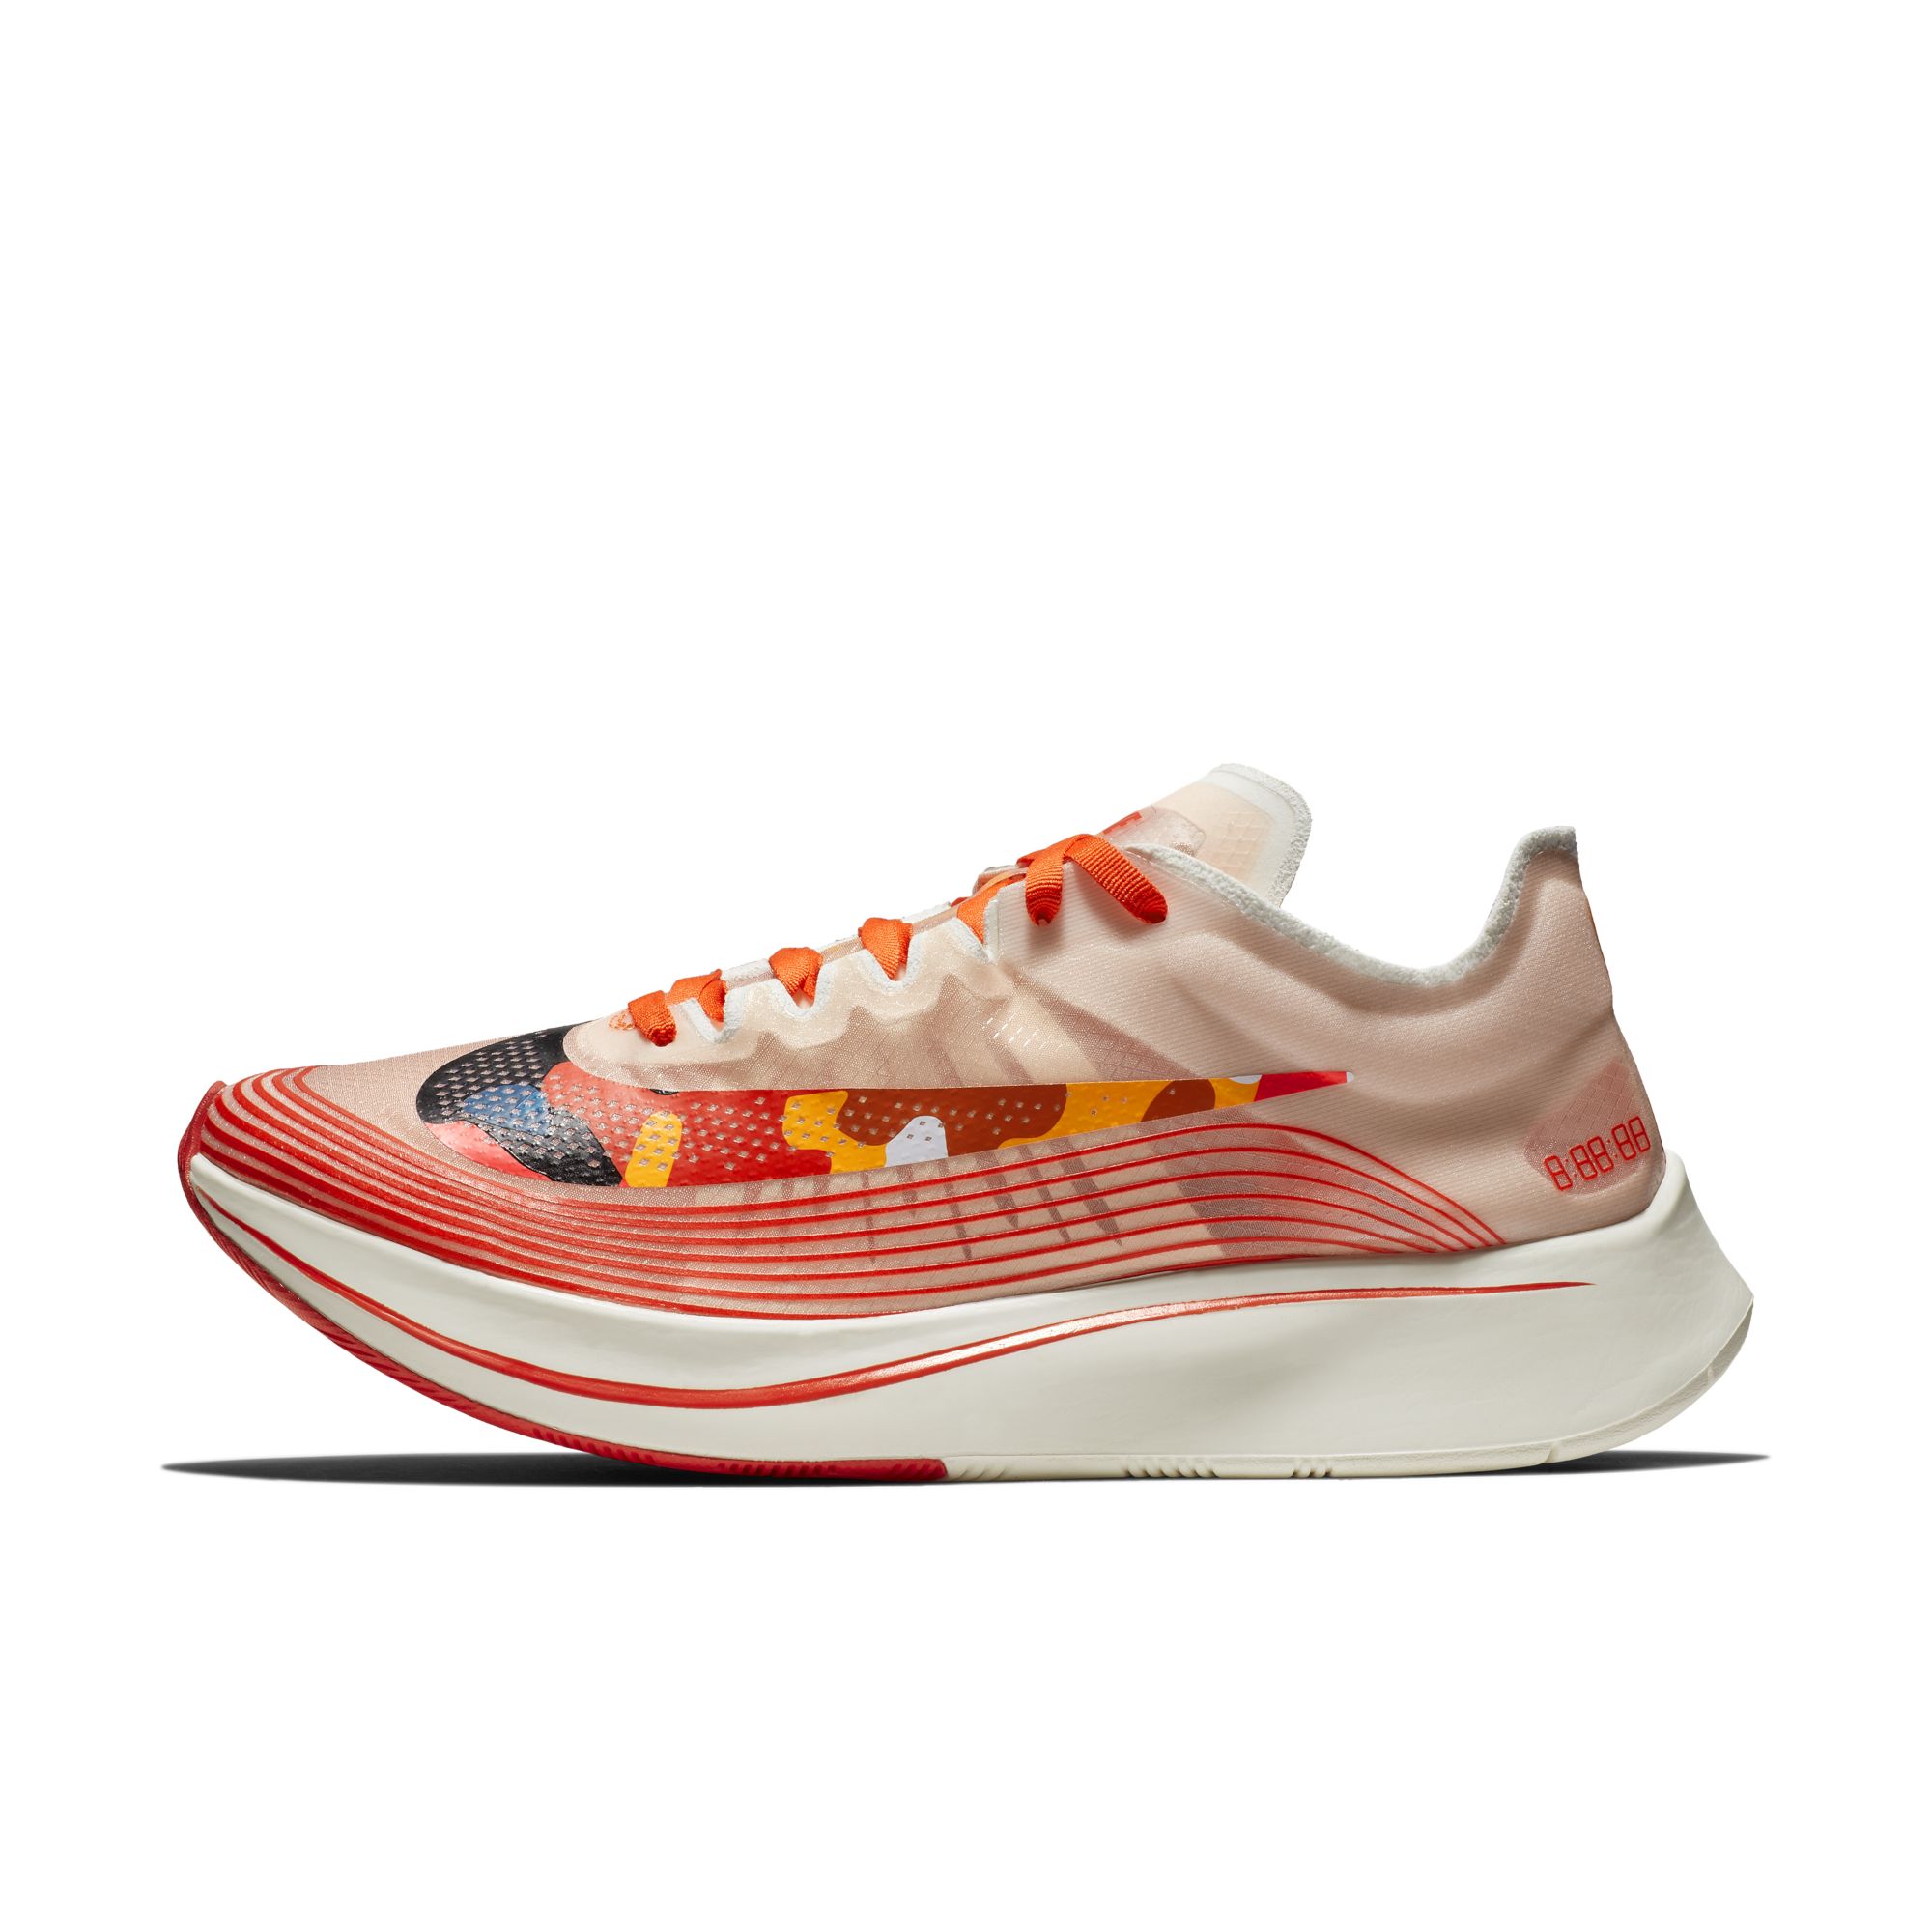 nike zoom fly sp outfit